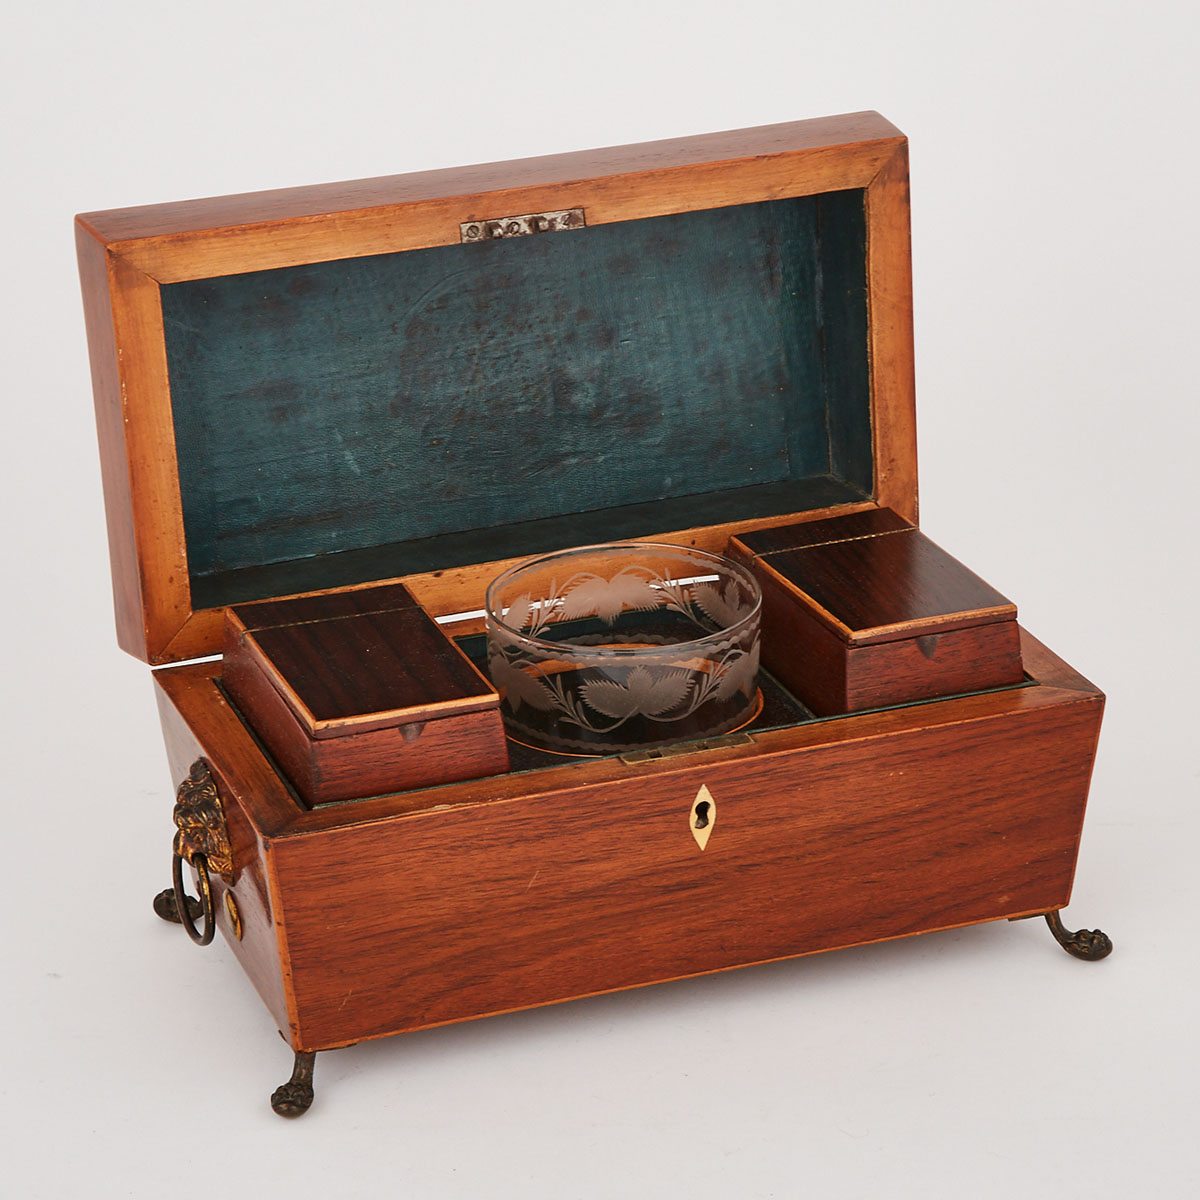 Large Early Victorian Satinwood Strung Rosewood Tea Caddy, c.1830